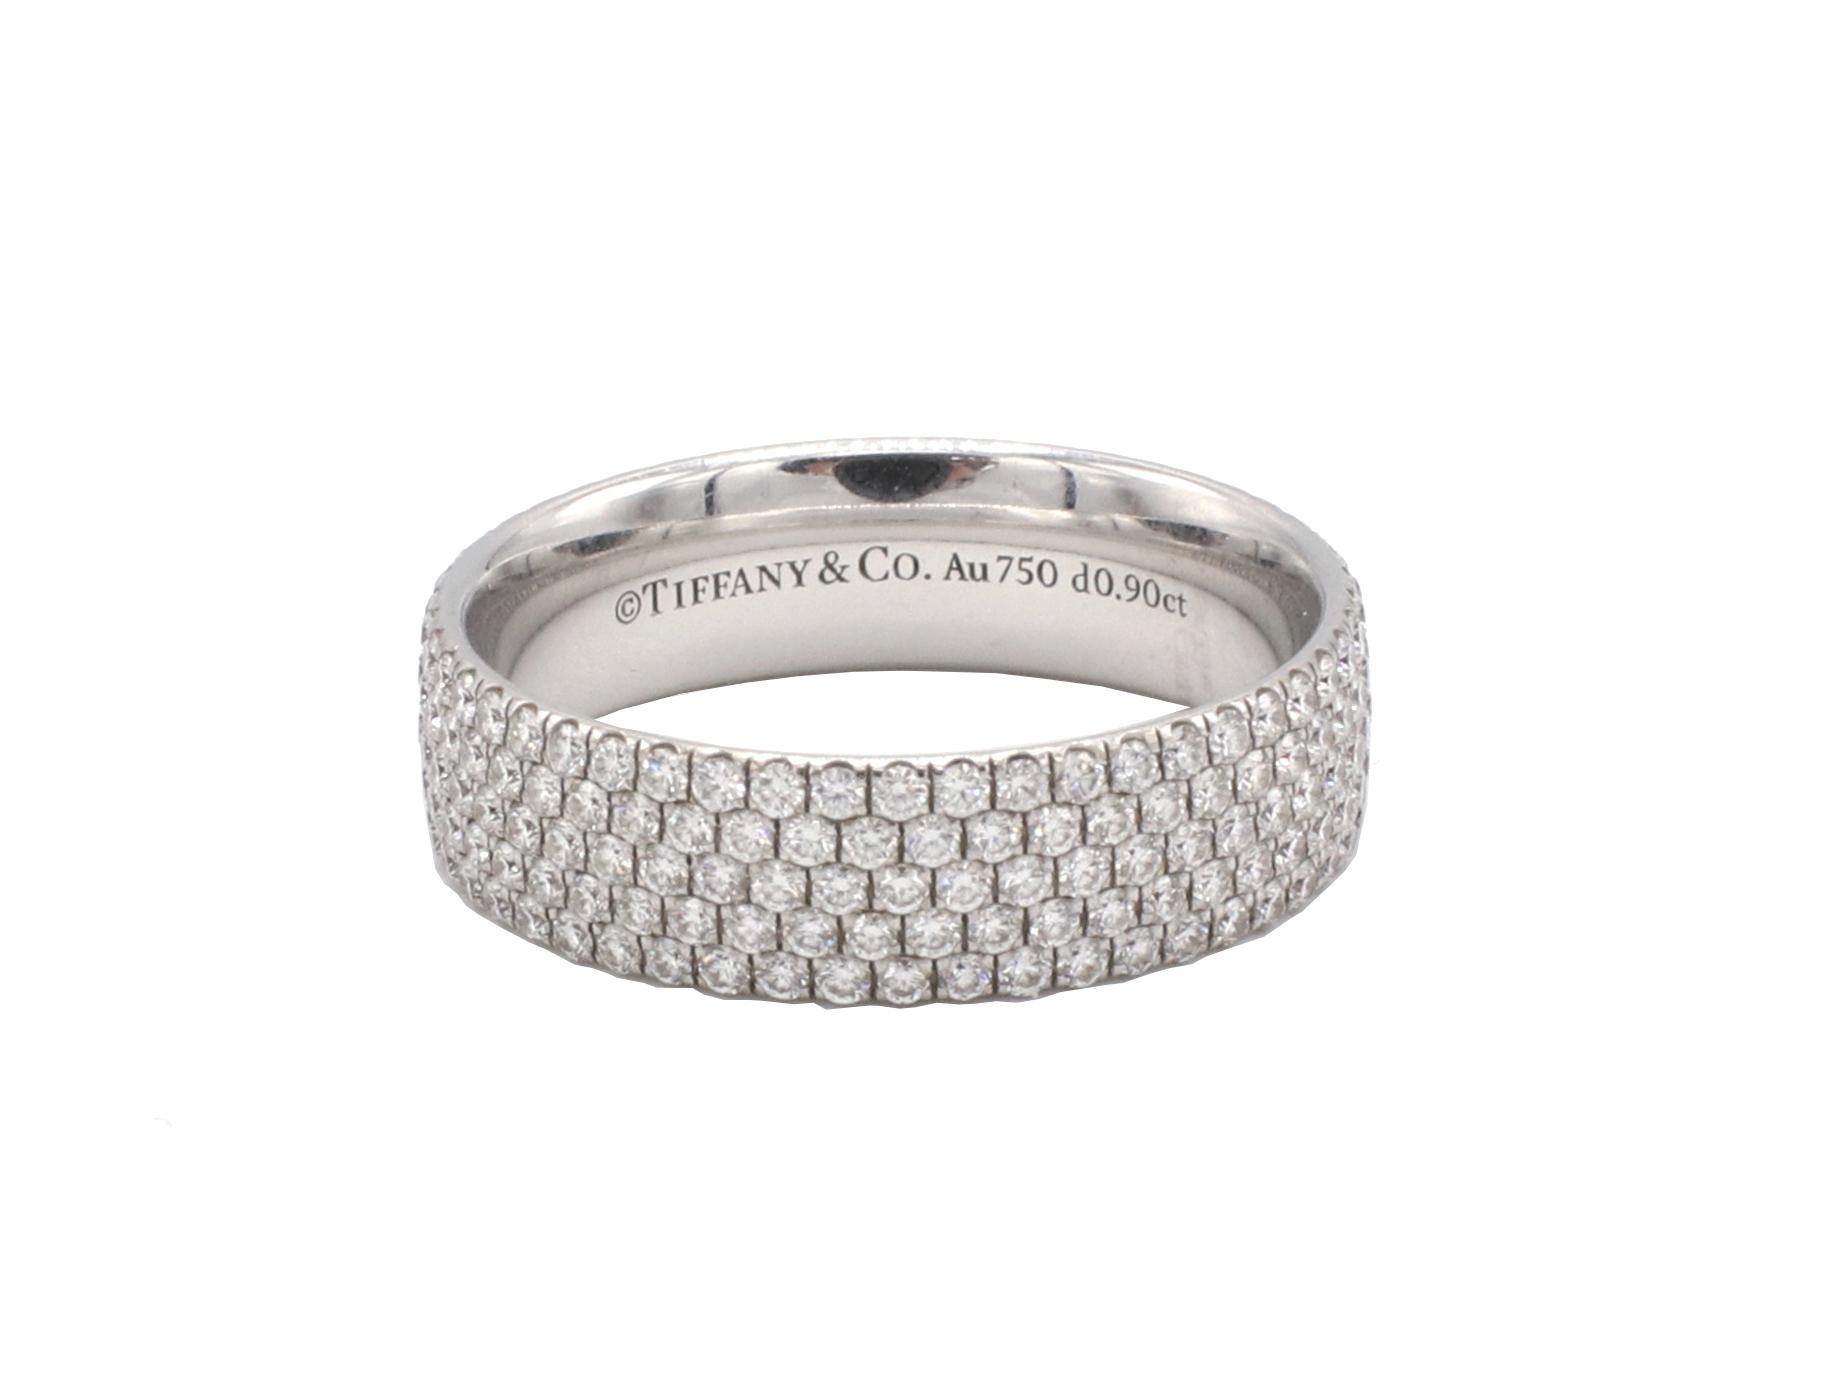 Tiffany & Co. Metro Five-Row Natural Diamond 18 Karat White Gold Band Ring 
Metal: 18k white gold
Weight: 3.87 grams
Diamonds: 0.90 CTW natural round F-G VS round diamonds
Width: 5mm
Size: 6 (US)
Signed: © Tiffany & Co. Au750 d0.90ct
Retail: $9,550